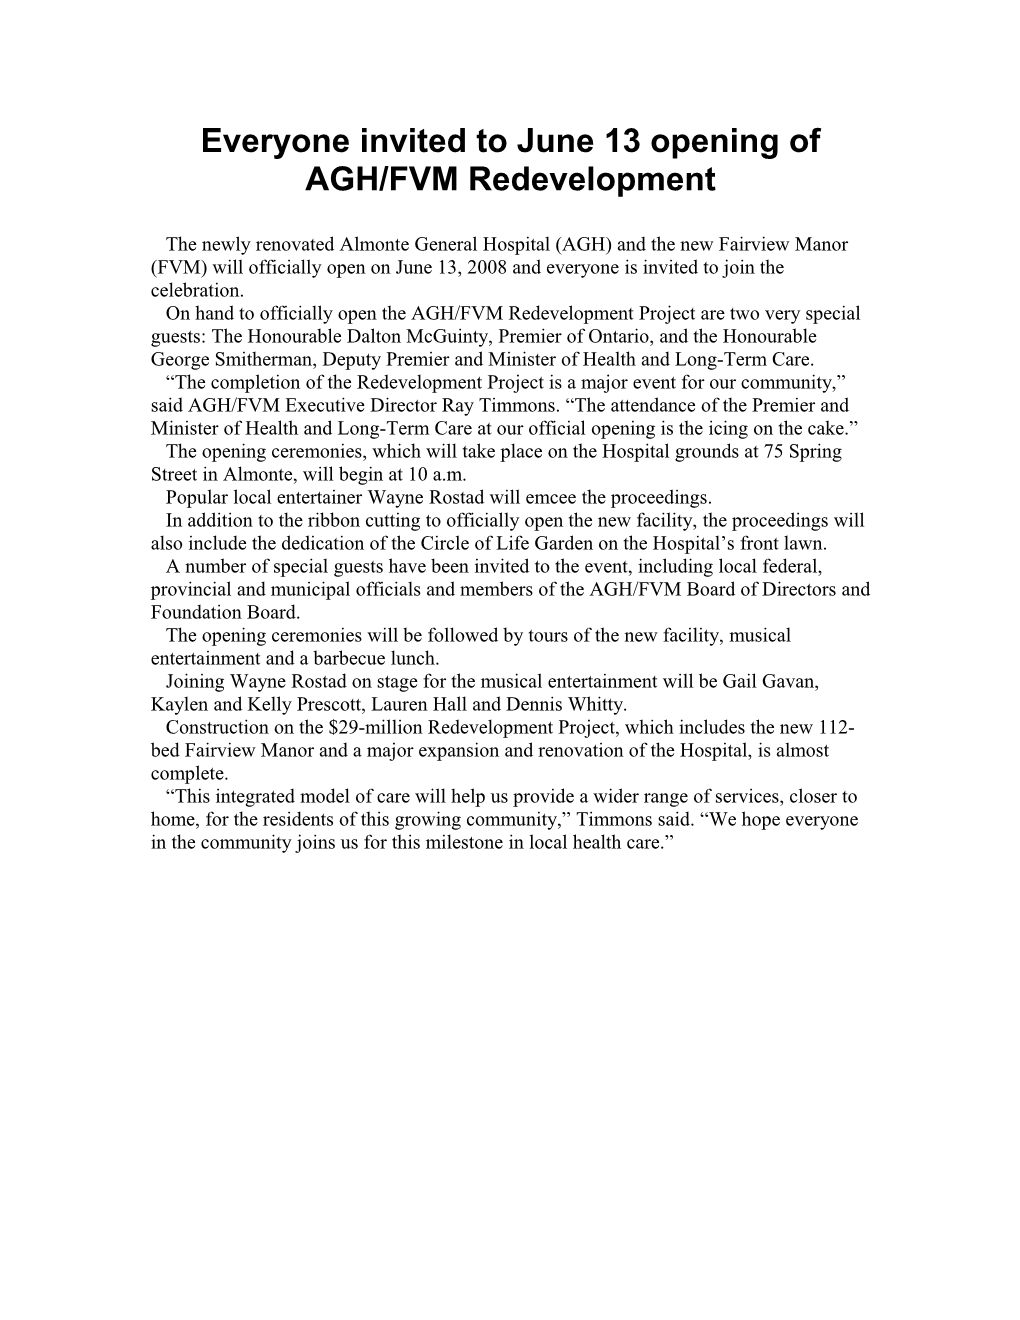 Everyone Invited to June 13 Opening of AGH/FVM Redevelopment